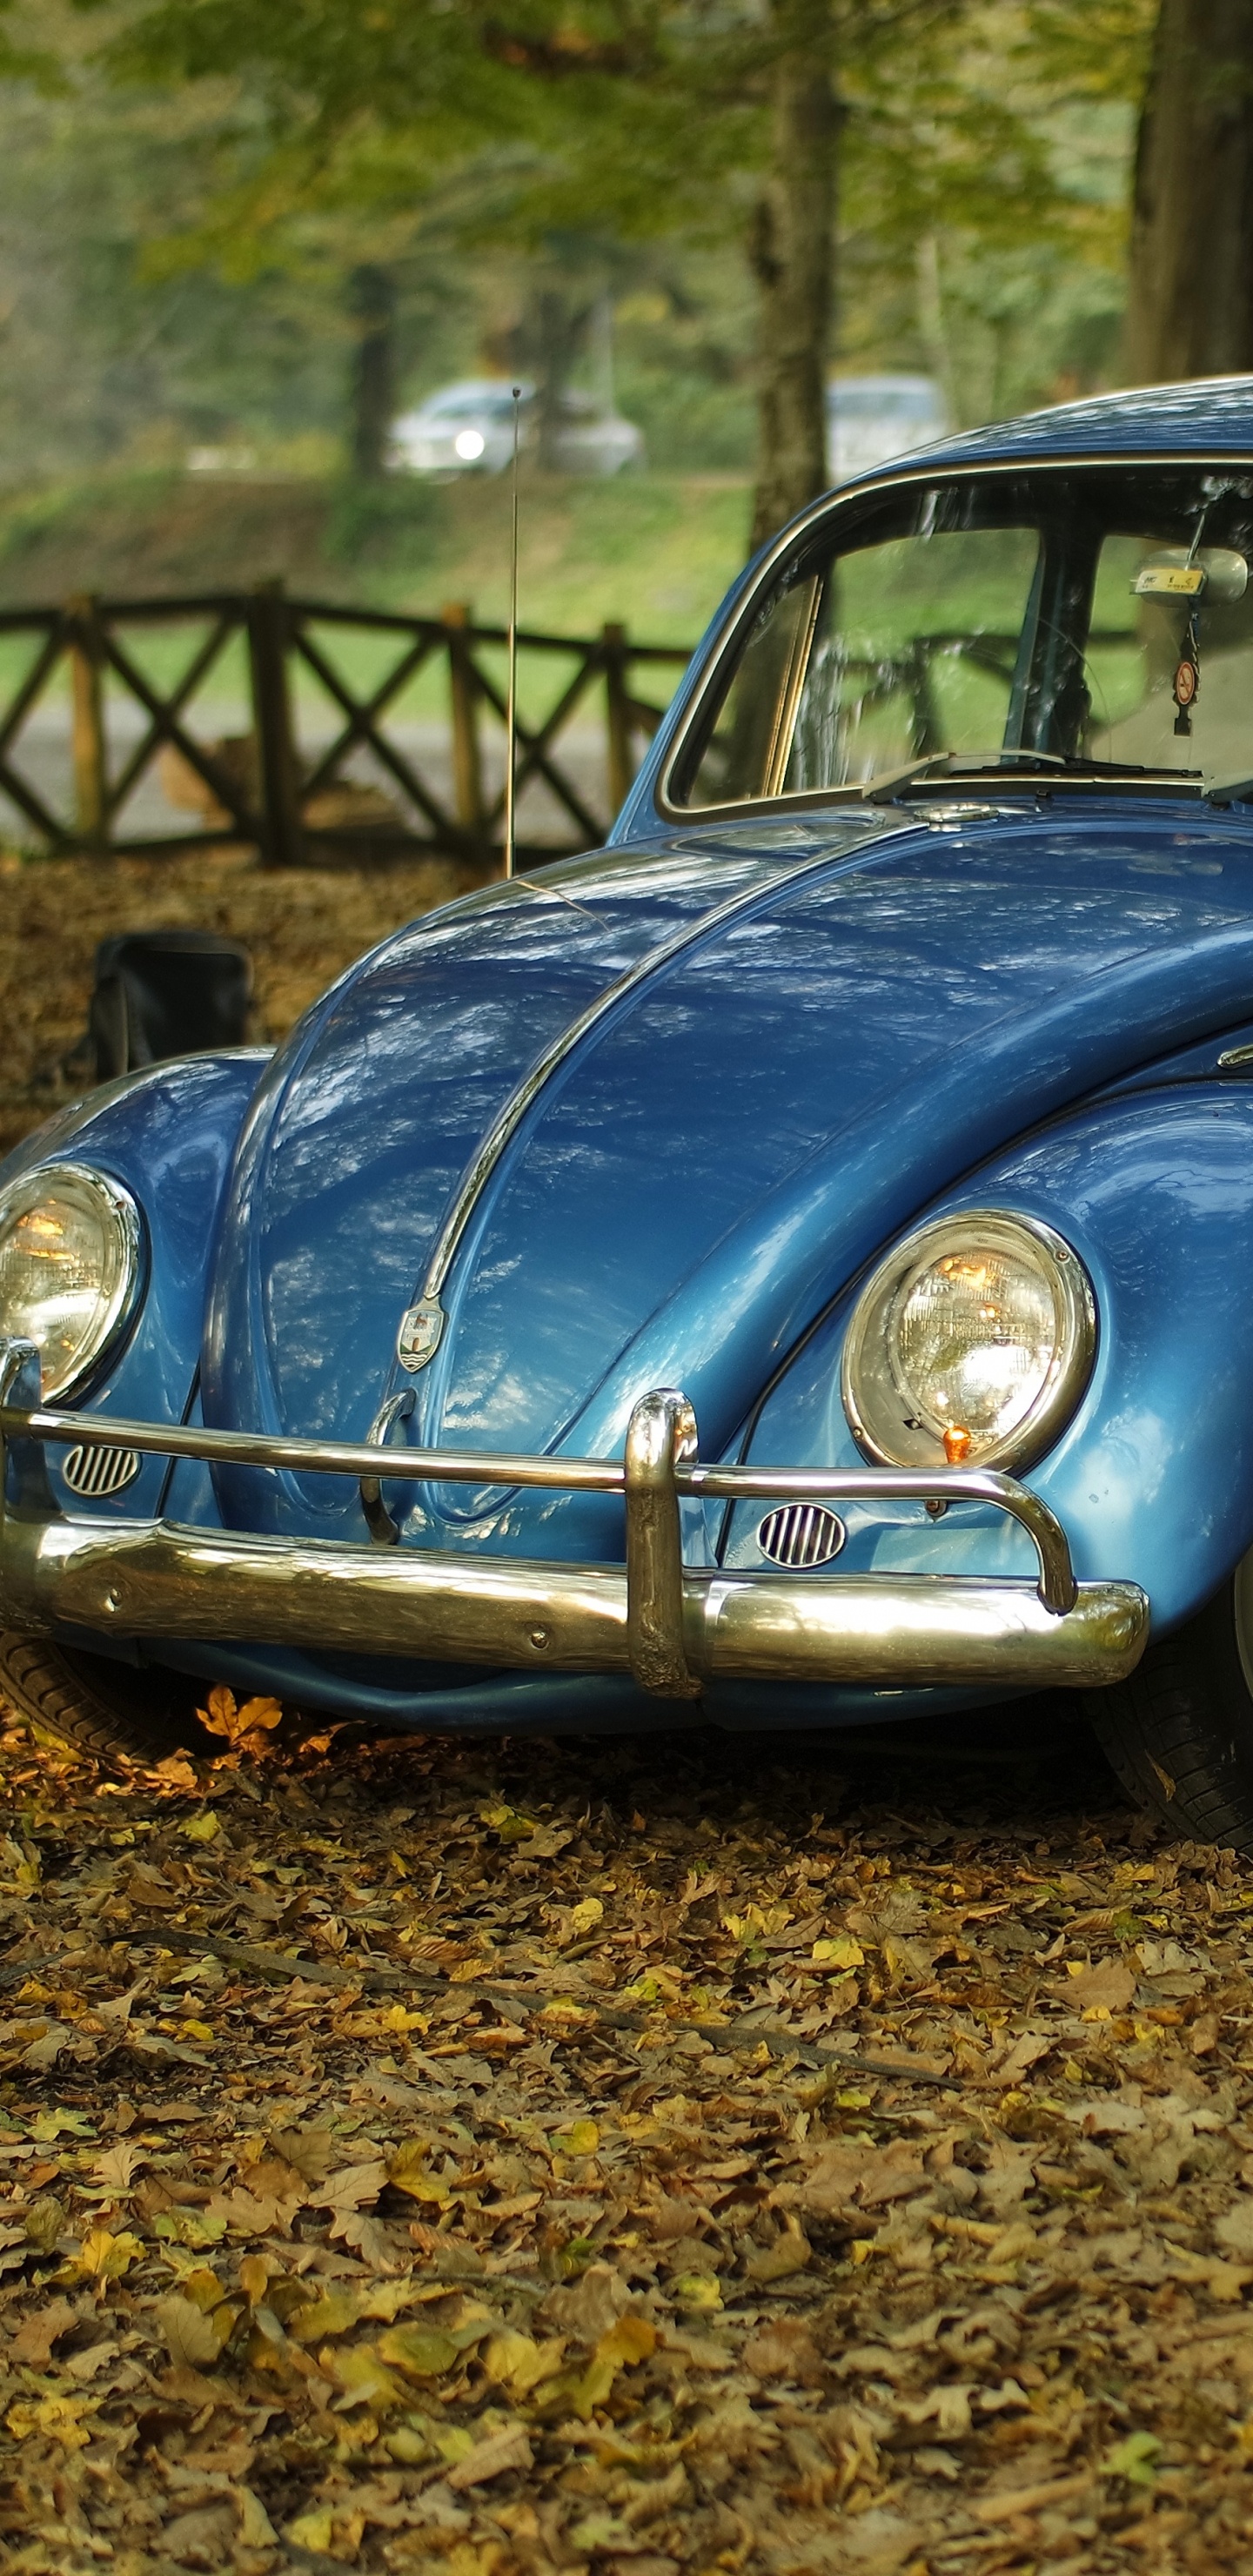 Blue Volkswagen Beetle on Brown Dried Leaves During Daytime. Wallpaper in 1440x2960 Resolution